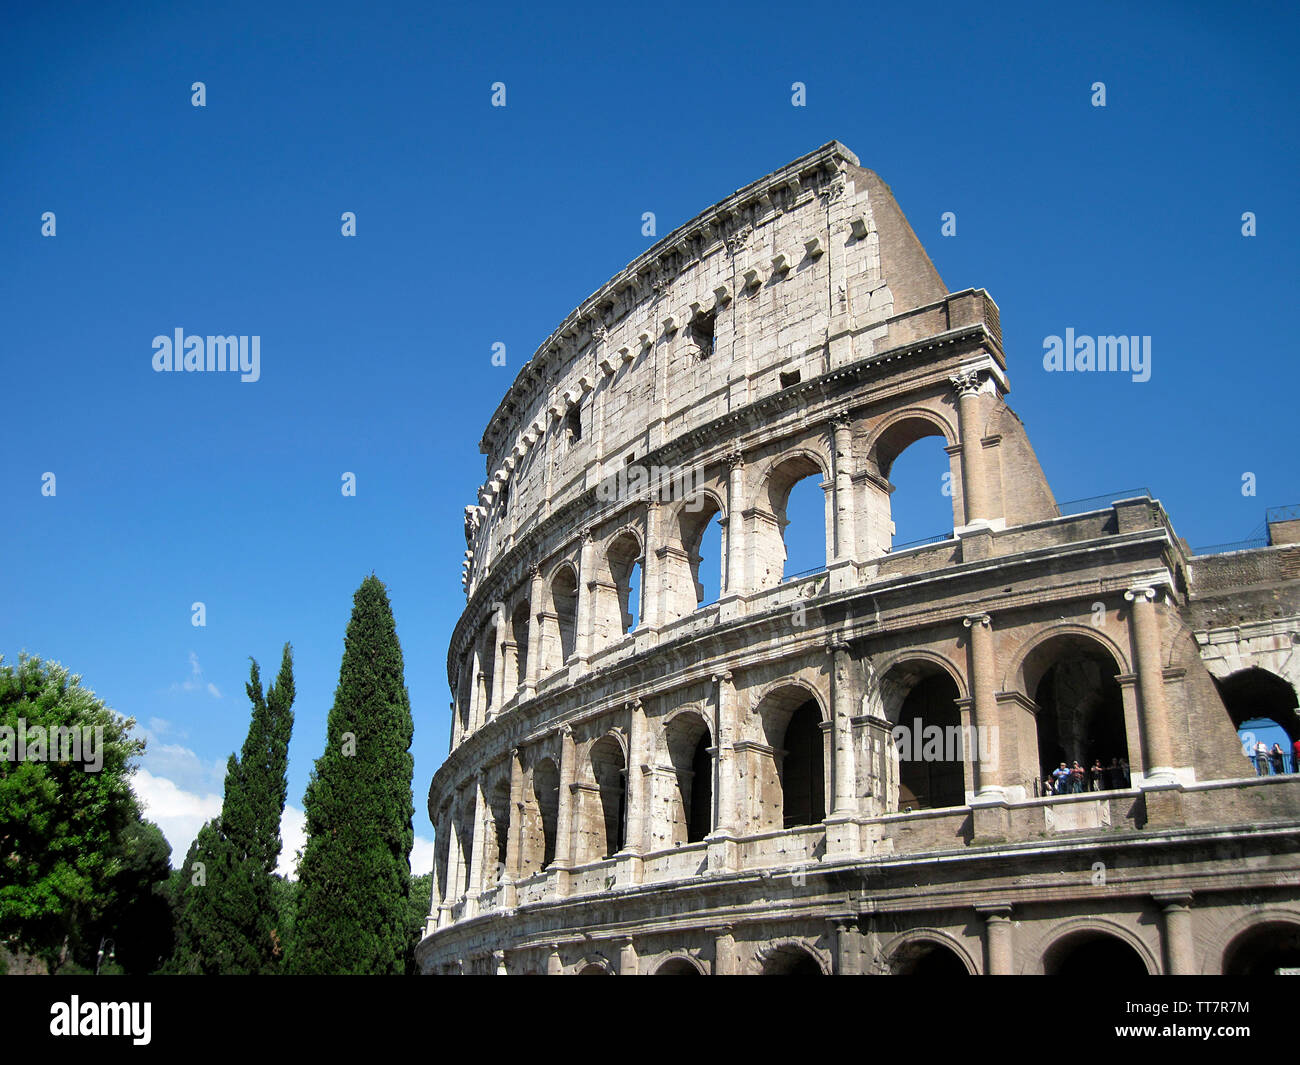 A VIEW OF THE EXTERIOR OF THE COLLOSEUM , ROME, ITALY. Stock Photo